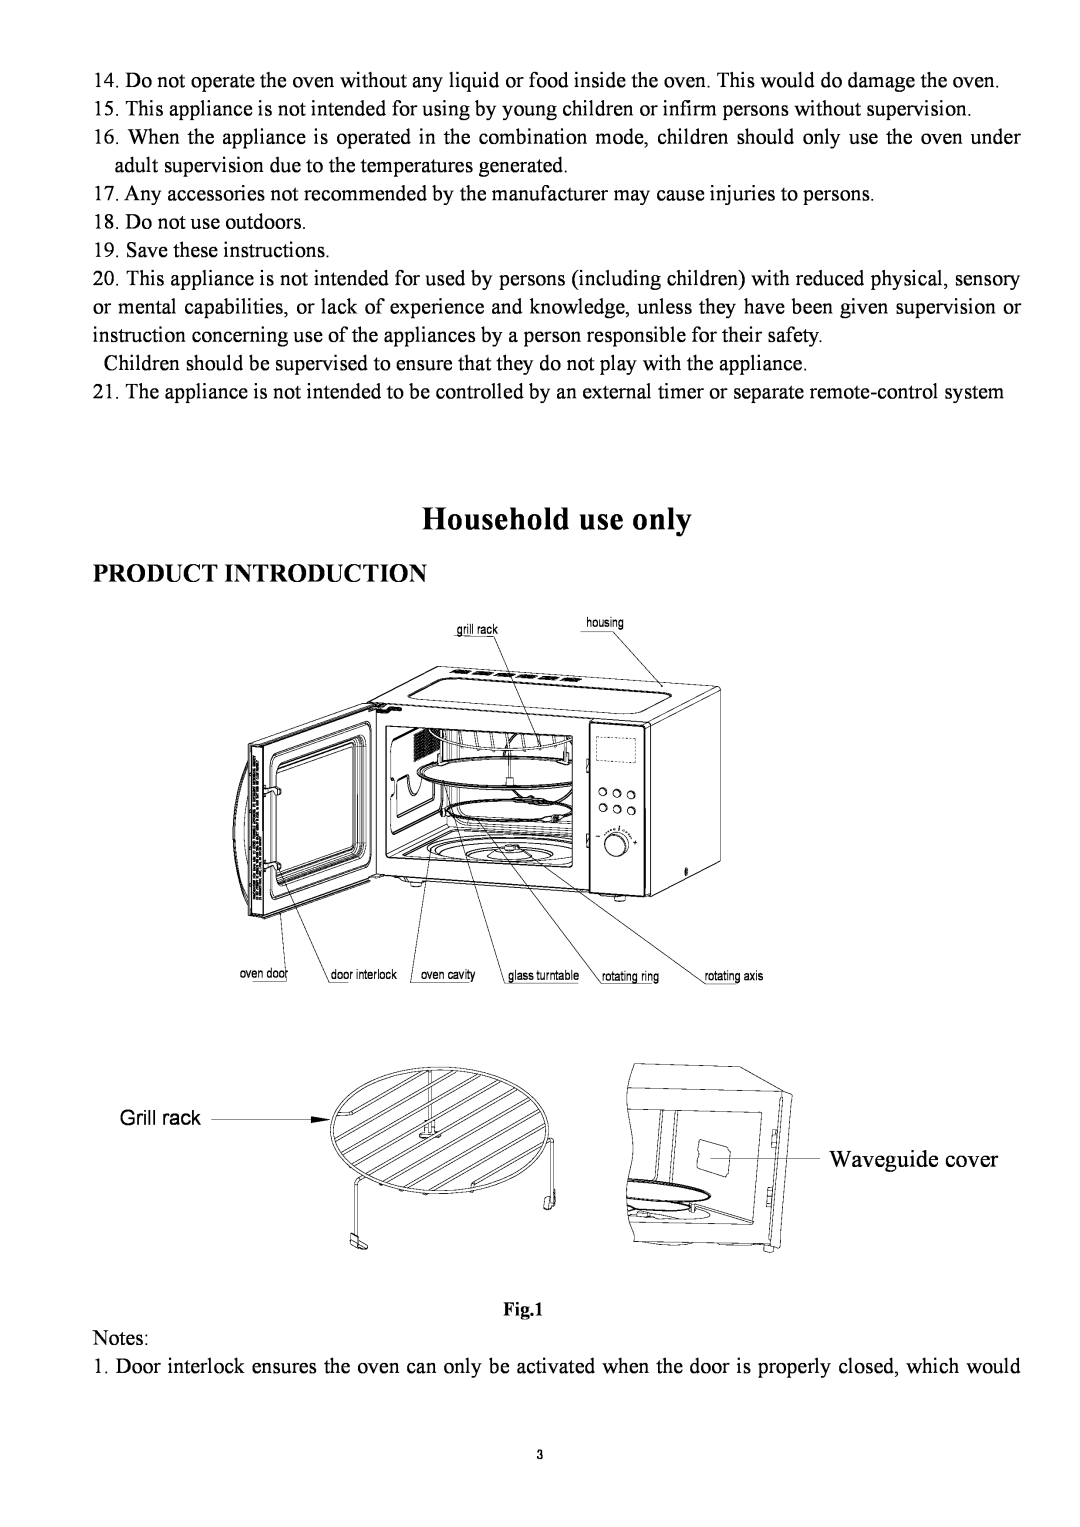 Haier HDN-3090EGS, HDN-3090EGB, HDN-3090EGF manual Product Introduction, Household use only, Waveguide cover 